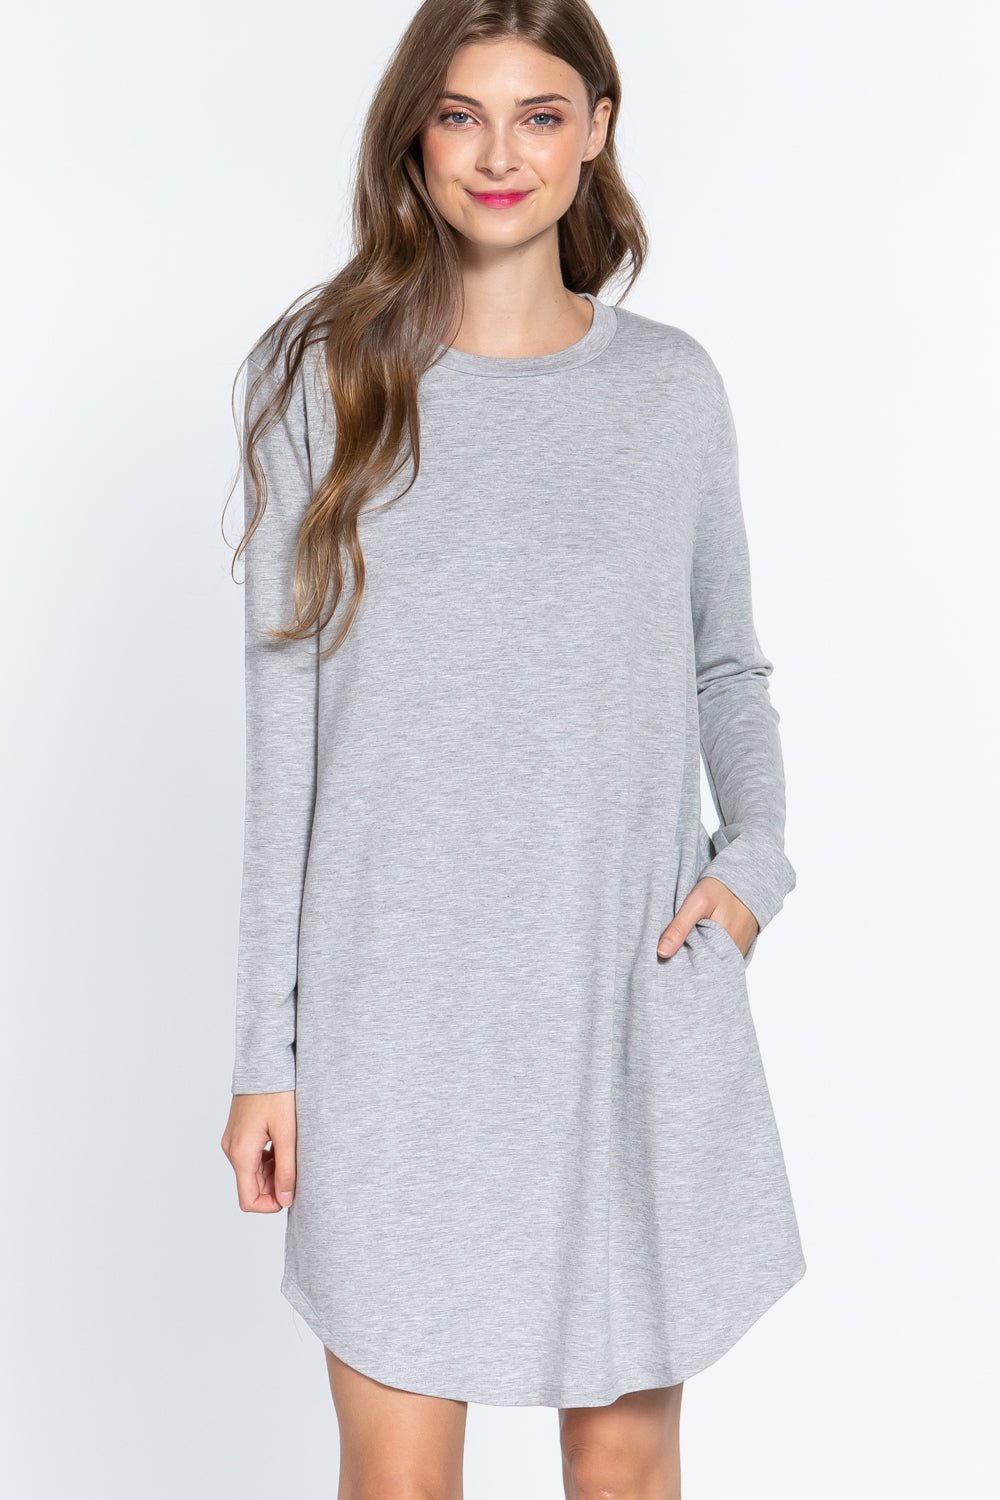 Our Best 65% Polyester 31% Rayon 4% Spandex Long Sleeve Round Neck French Terry Mini Dress (Heather Grey)